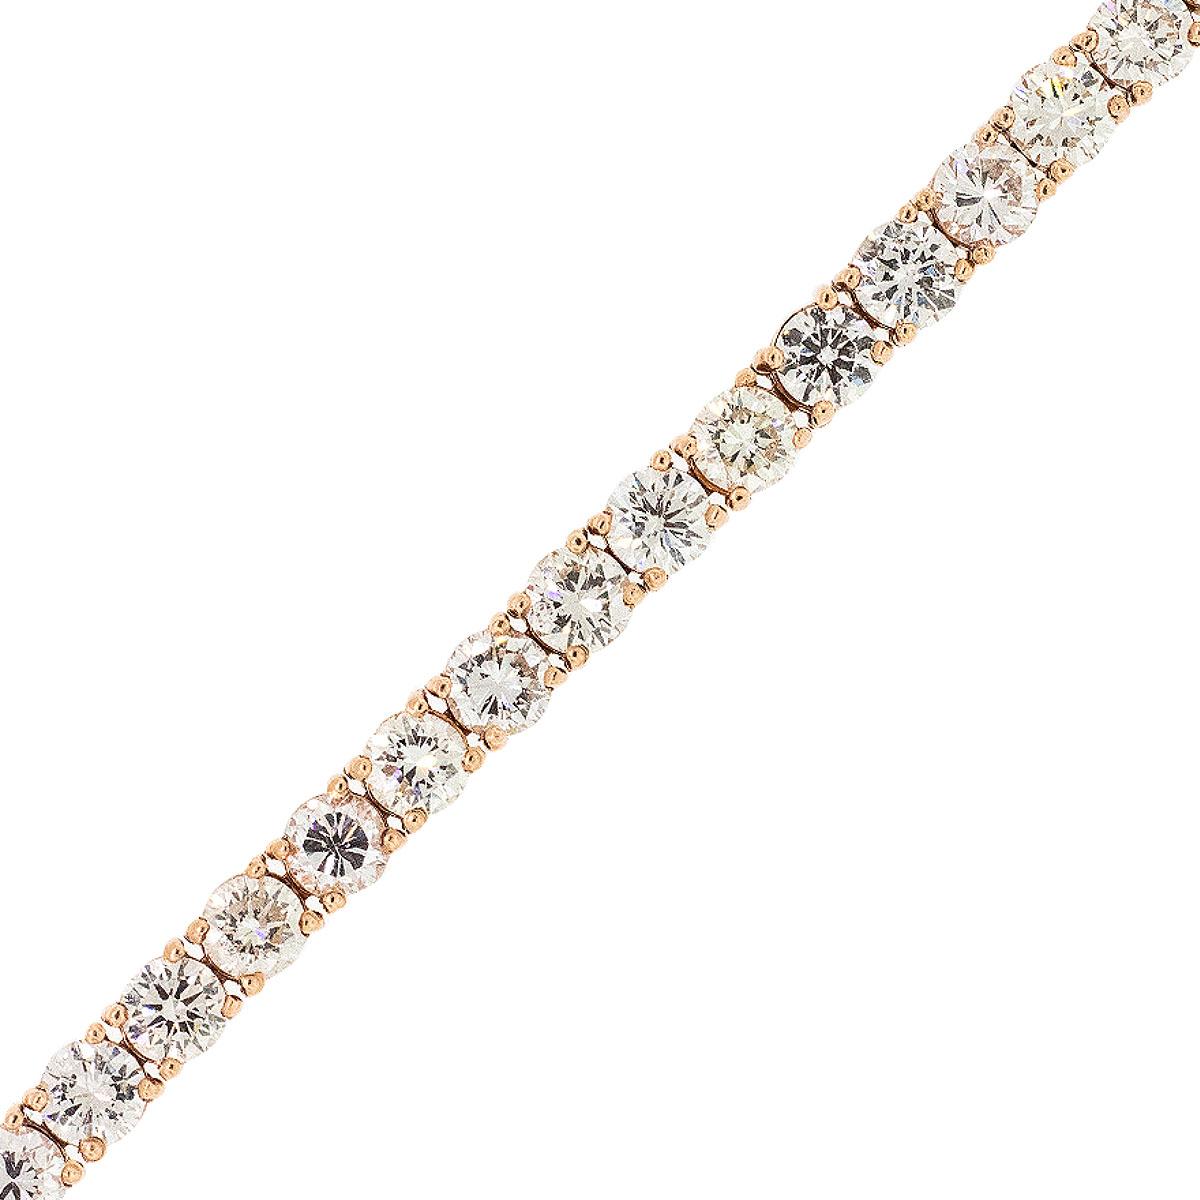 
When it comes to jewelry that epitomizes timeless elegance and luxury, few pieces can rival the classic diamond tennis bracelet. Today, we're diving into the world of fine jewelry to explore a breathtaking creation: an unbranded Rose Gold 8ctw